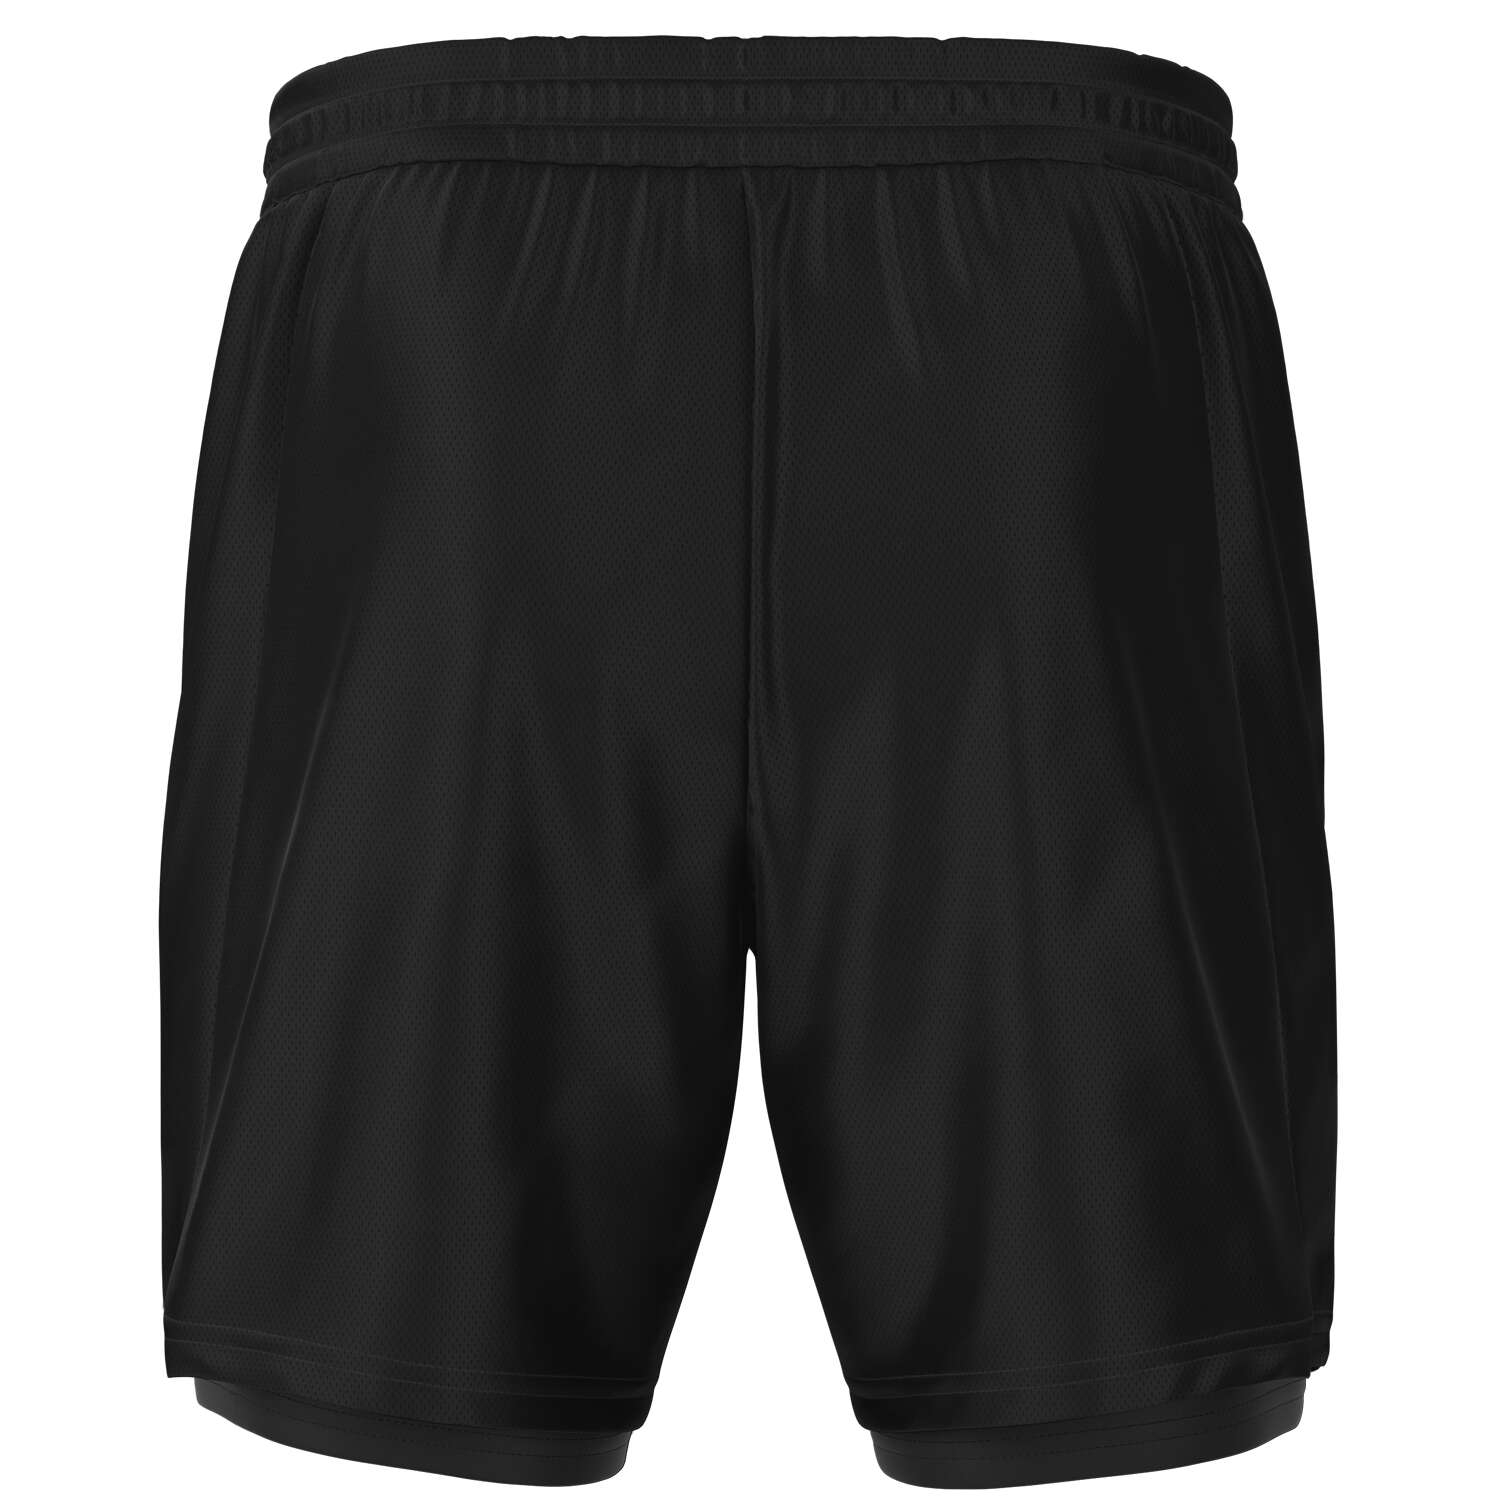 Black Tennis Men Lined Shorts 7 Inch, Compression Liner 2 in 1 Athletic Sports Rackets Sweat Wicking Mesh Phone Pockets Drawstring Starcove Fashion